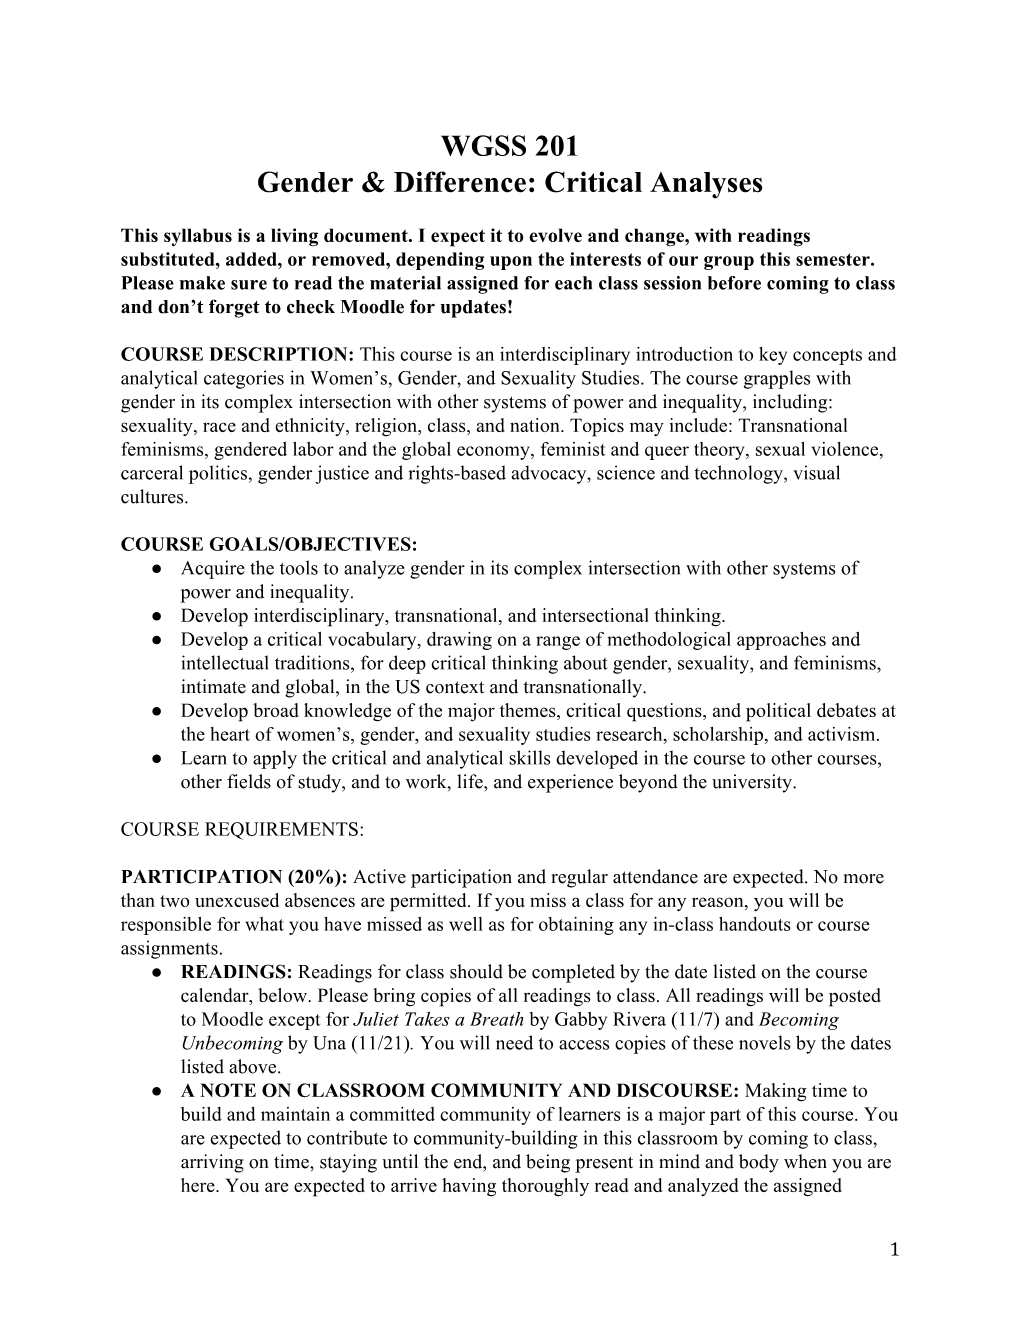 WGSS 201 Gender & Difference: Critical Analyses